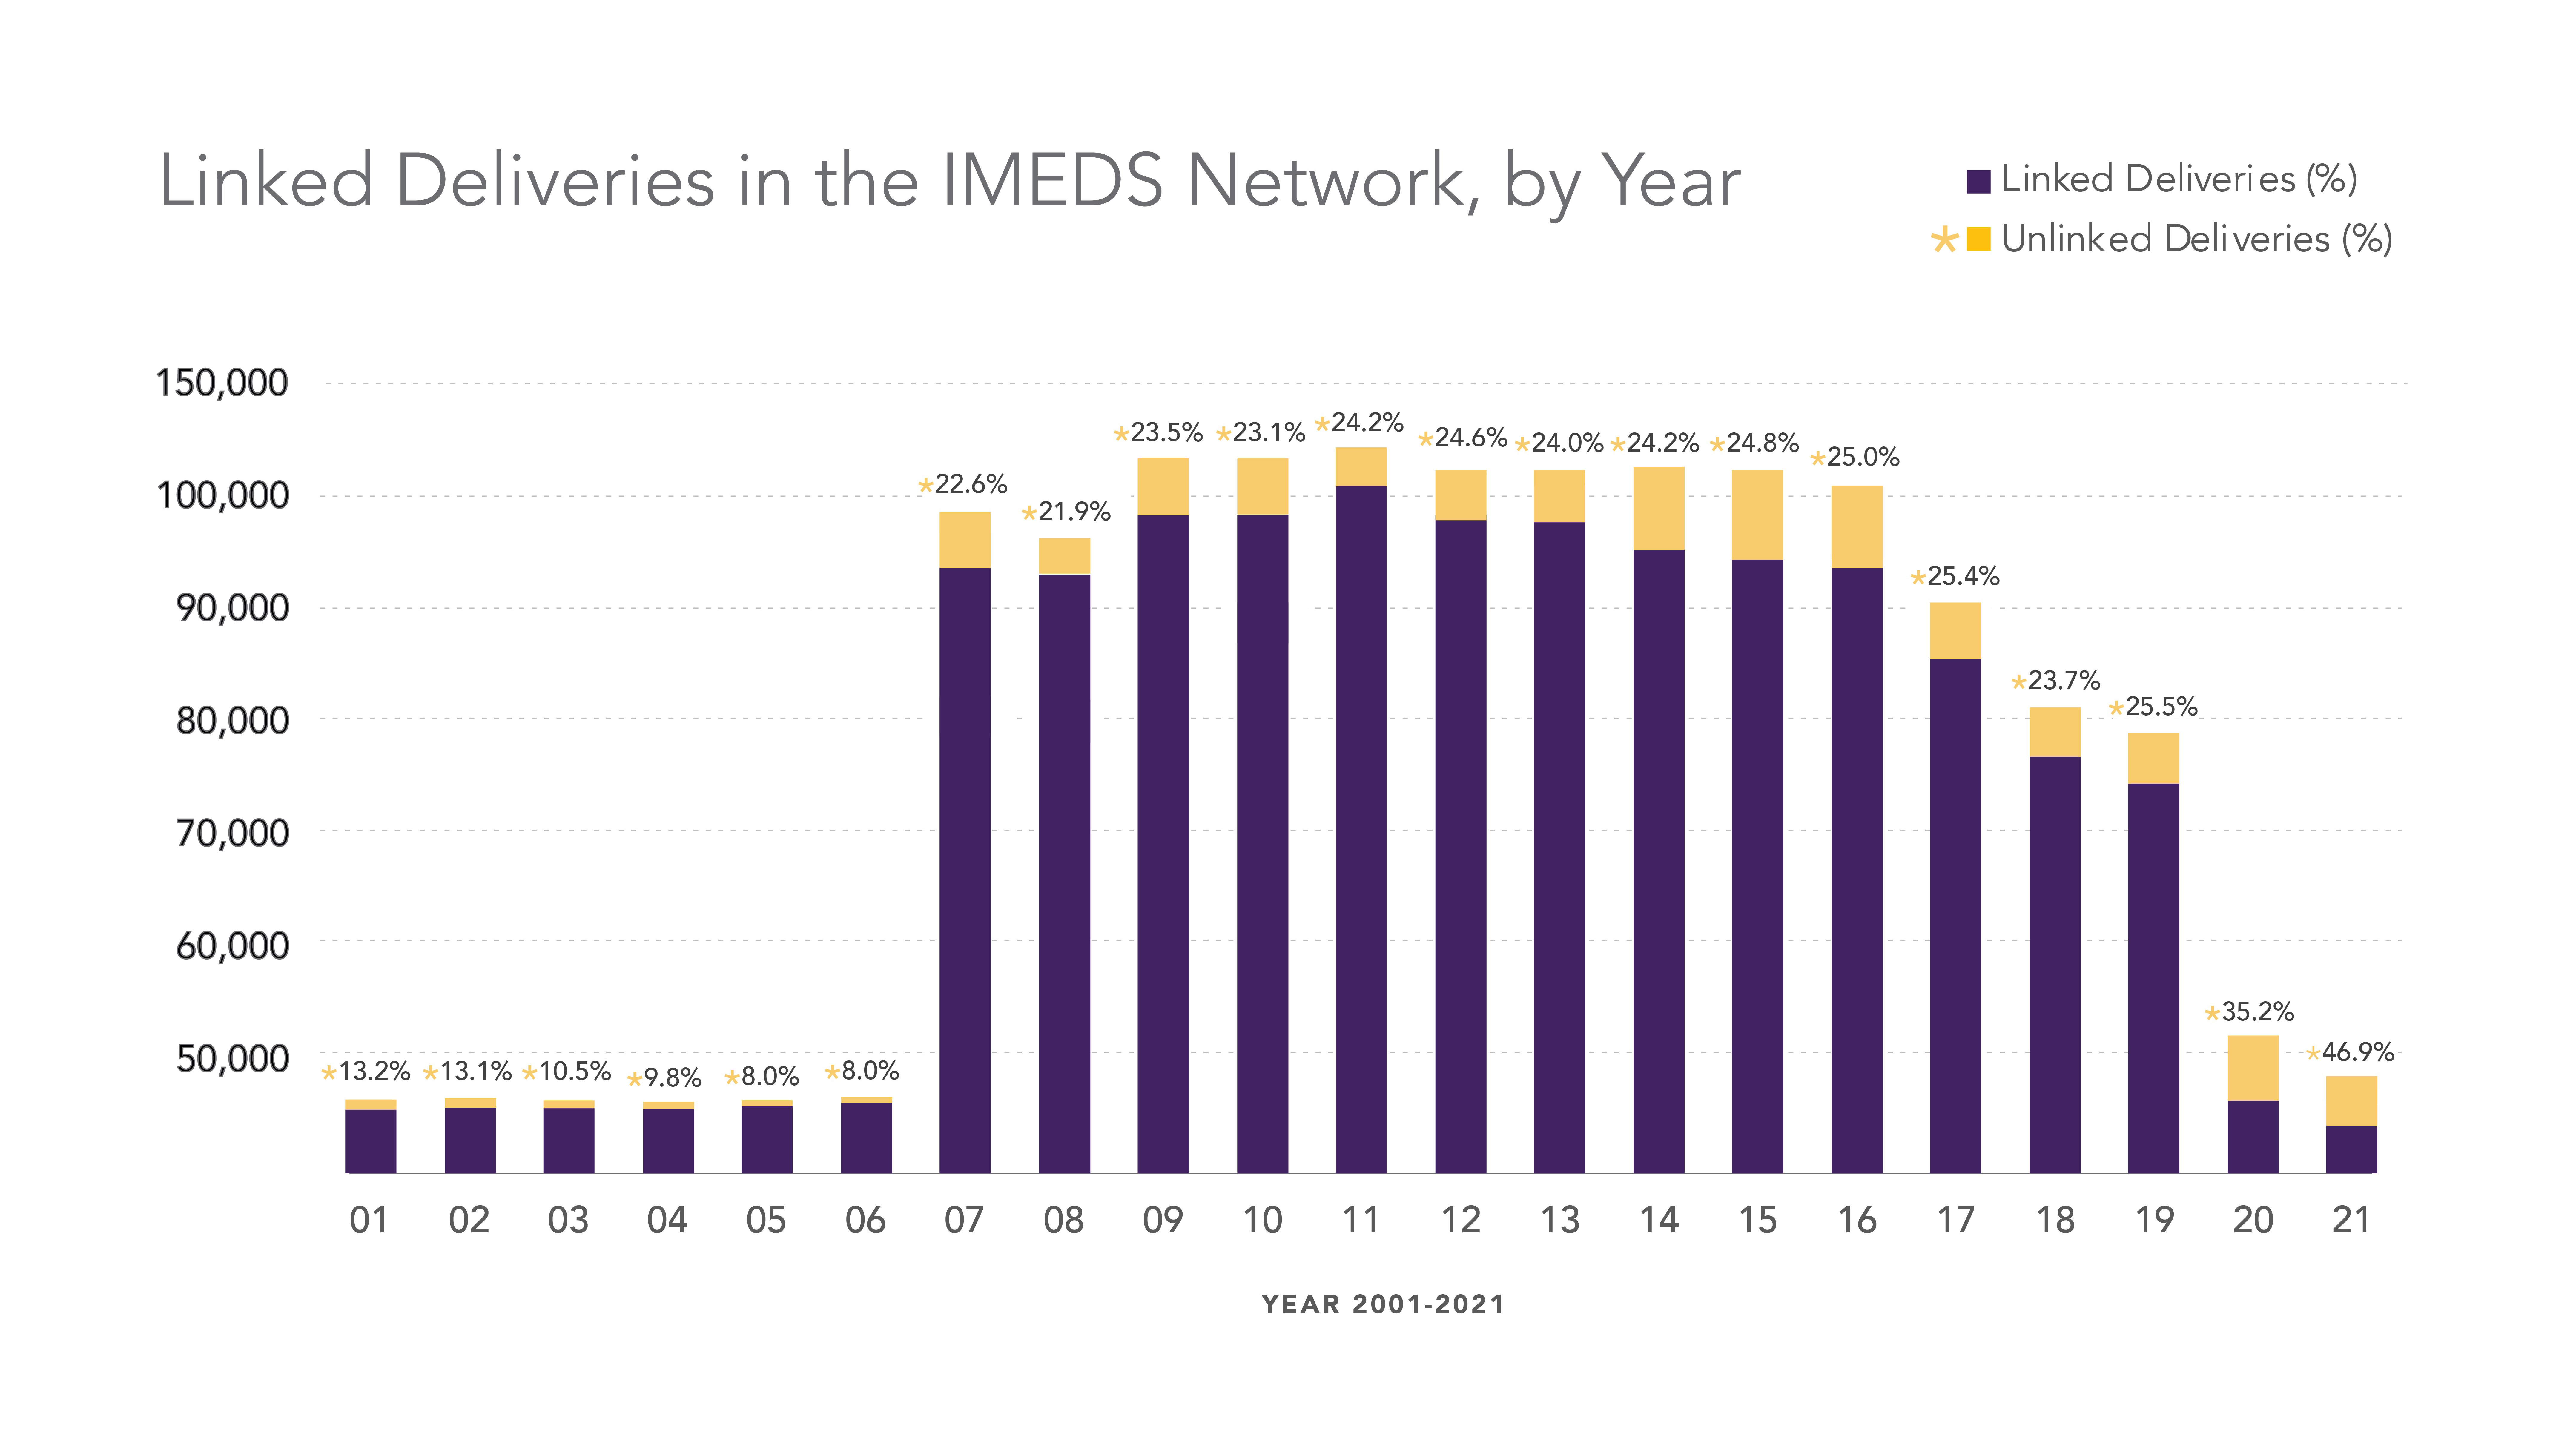 Linked Deliveries IMEDS Network by Year